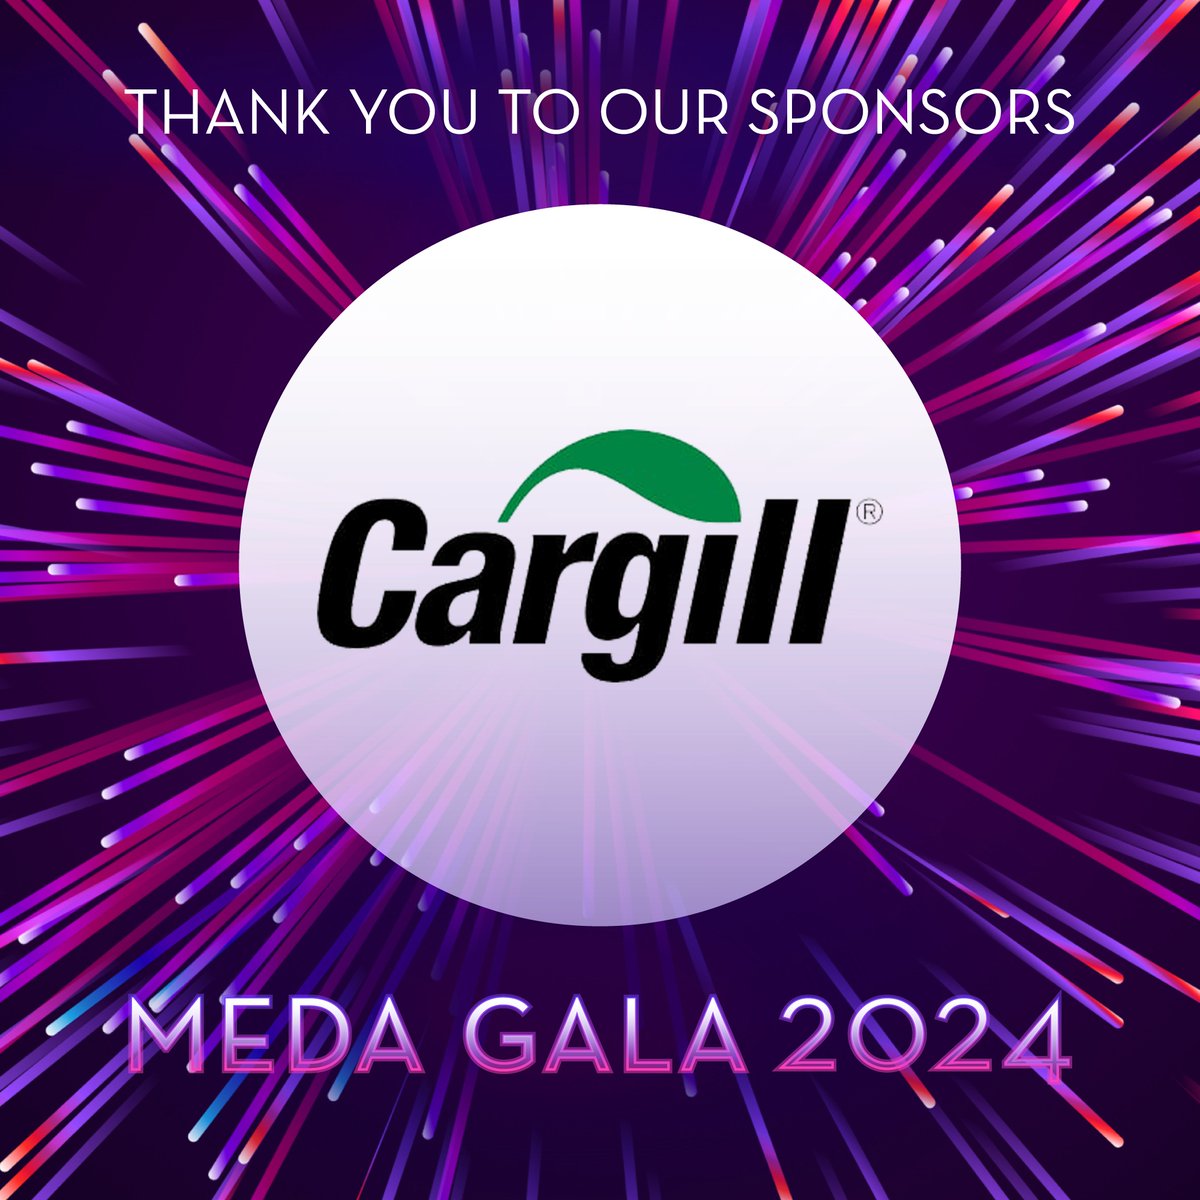 A huge thank you to @Cargill for becoming a sponsor for the MEDA Gala. Together we are empowering BIPOC Entrepreneurs & celebrating their achievements within our communities. We are grateful for your support & are excited to celebrate with you on May 17th at U.S. Bank Stadium.